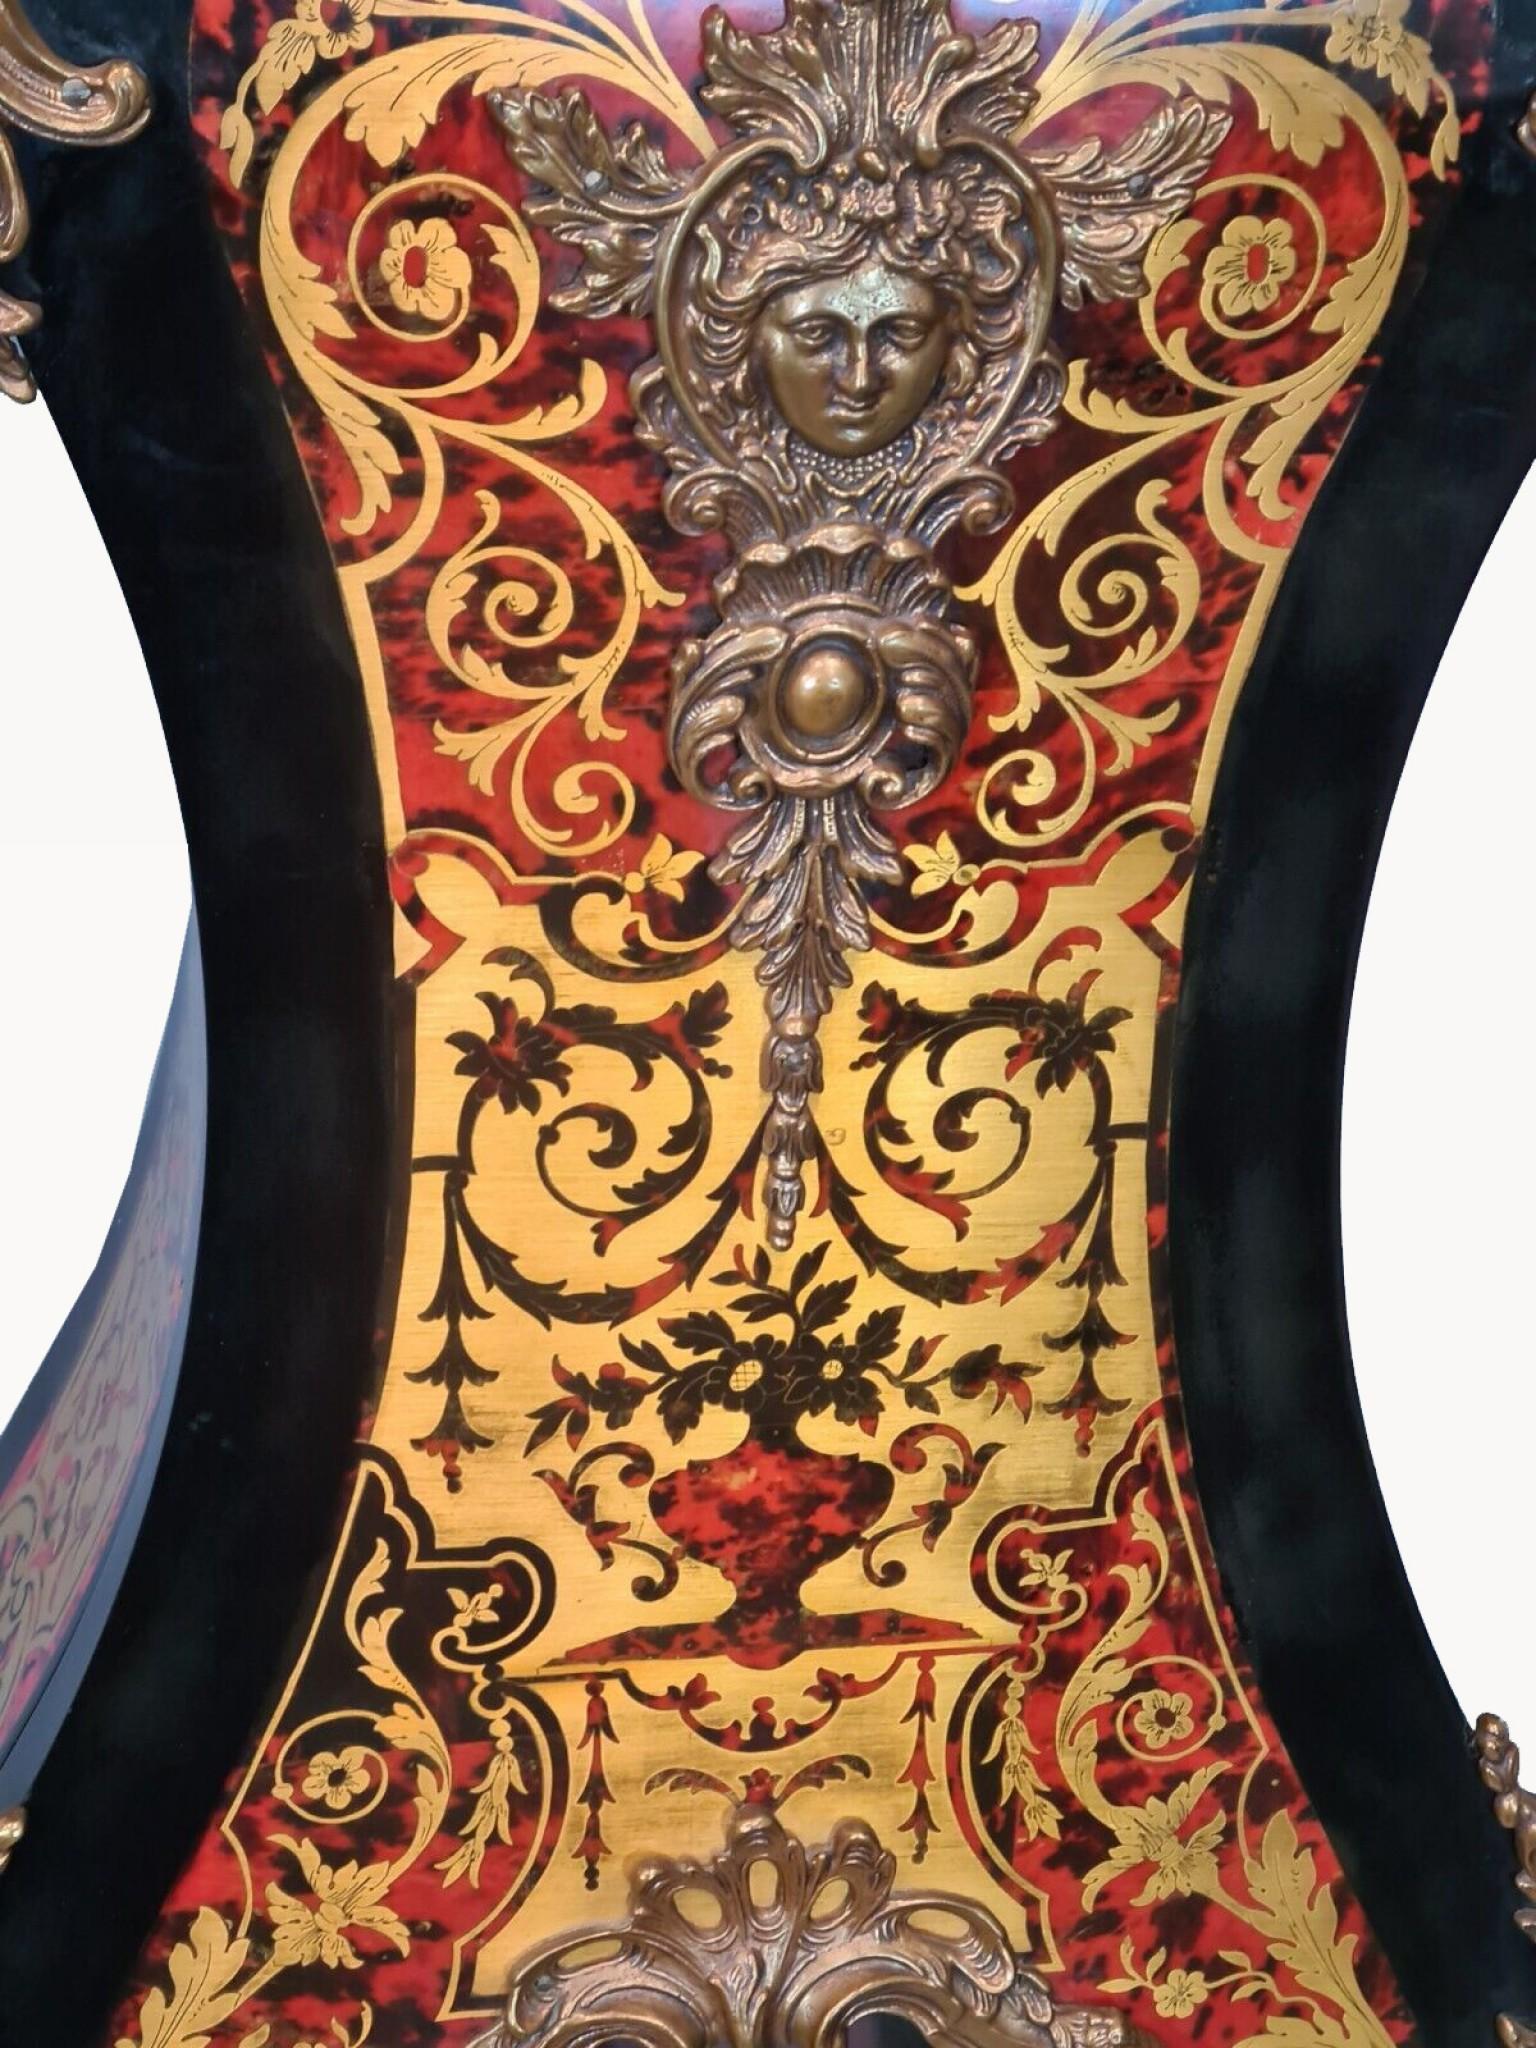 Wonderful Boulle style longcase grandfather clock
Fully working with Westminster chimes
Intricate faux tortoiseshell and brass inlay in the classic Boulle manner
Glass viewing panel set in door
All gilt fixtures are original
We bought this from a